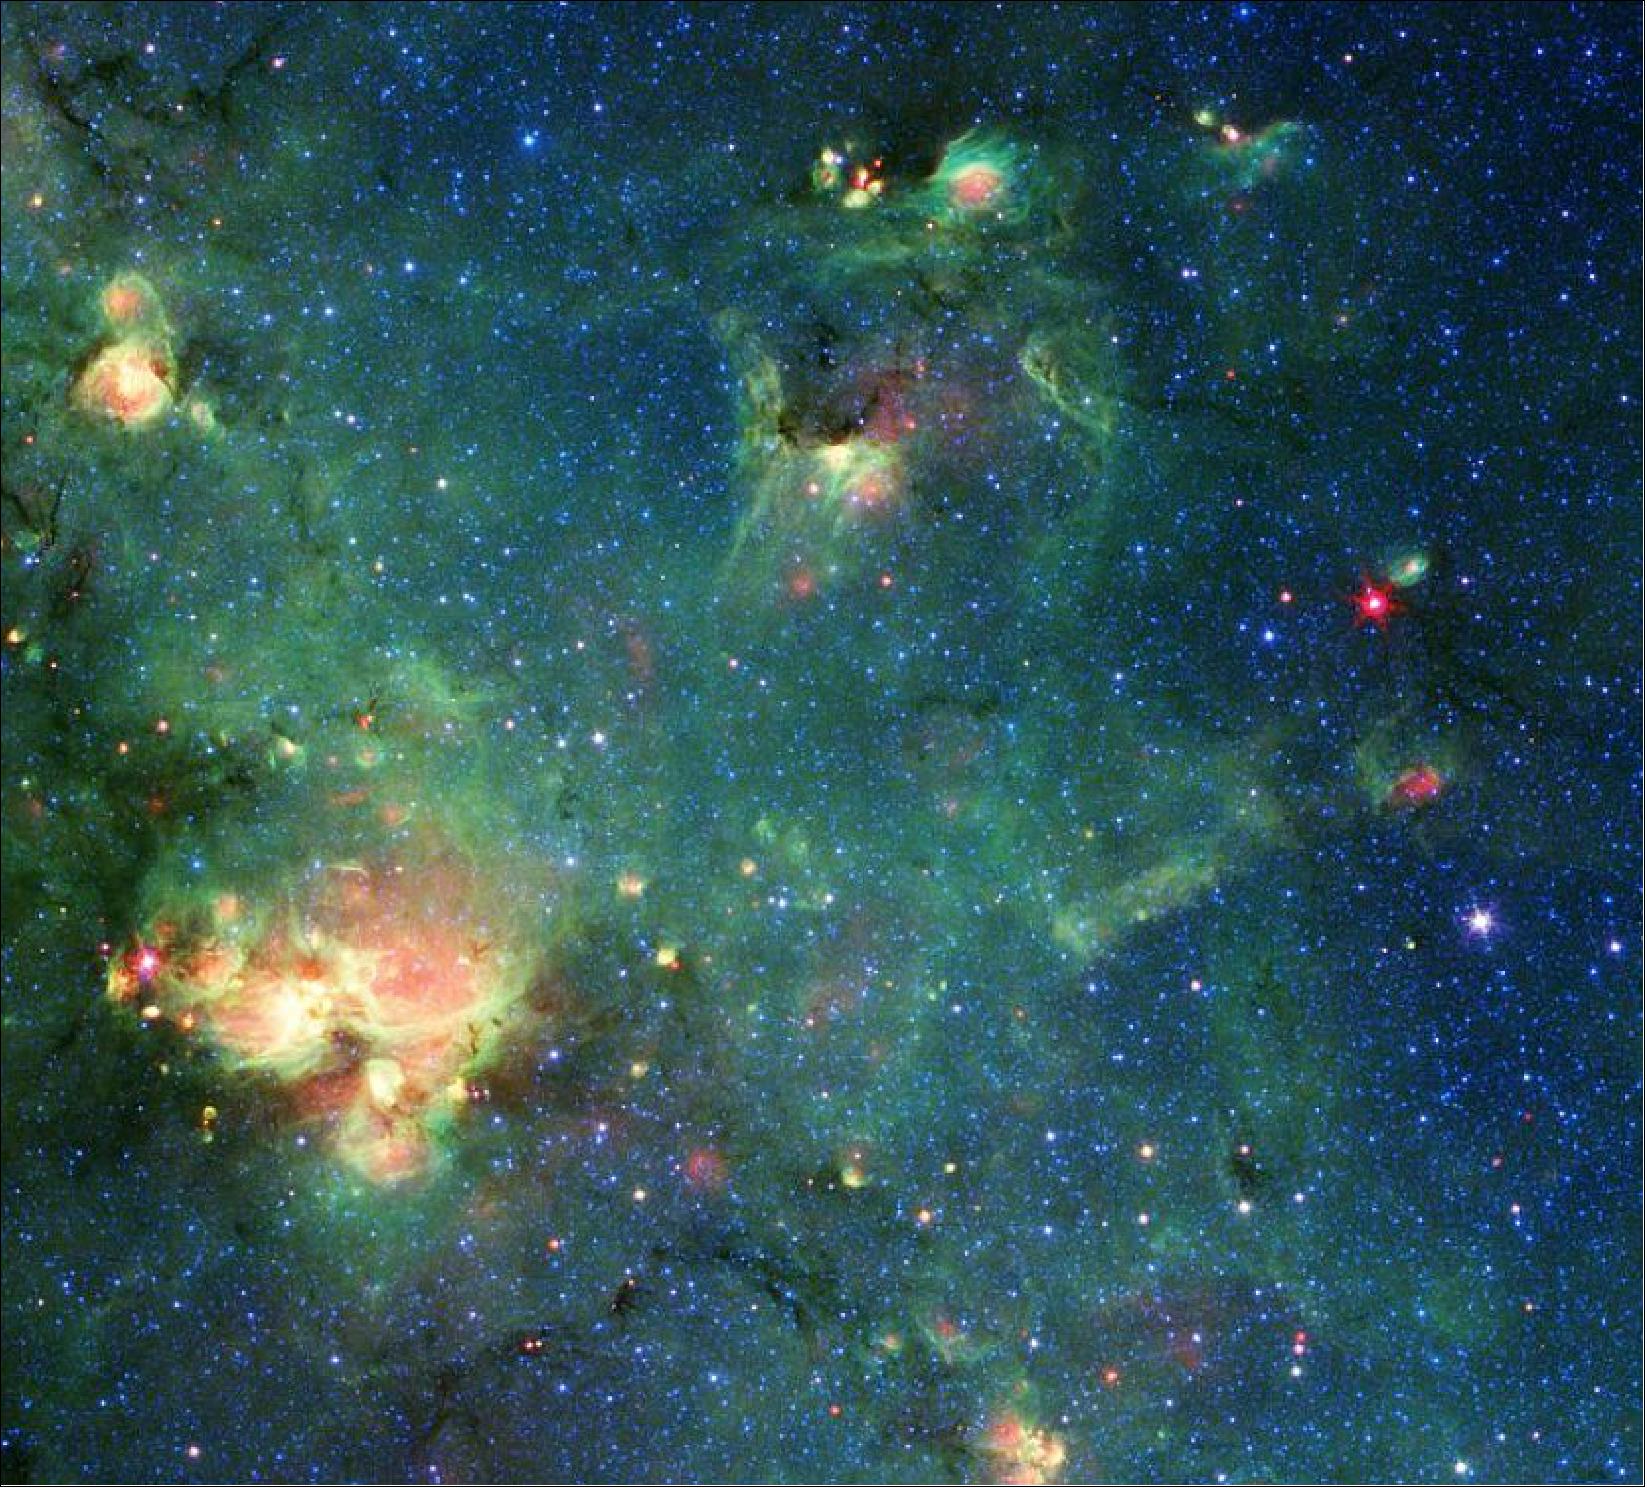 Figure 9: NASA’s Spitzer Space Telescope imaged this cloud of gas and dust. The colors represent different wavelengths of infrared light and can reveal such features as places where radiation from stars had heated the surrounding material. Any resemblance to Godzilla is purely imaginary (image credit: NASA/JPL-Caltech)